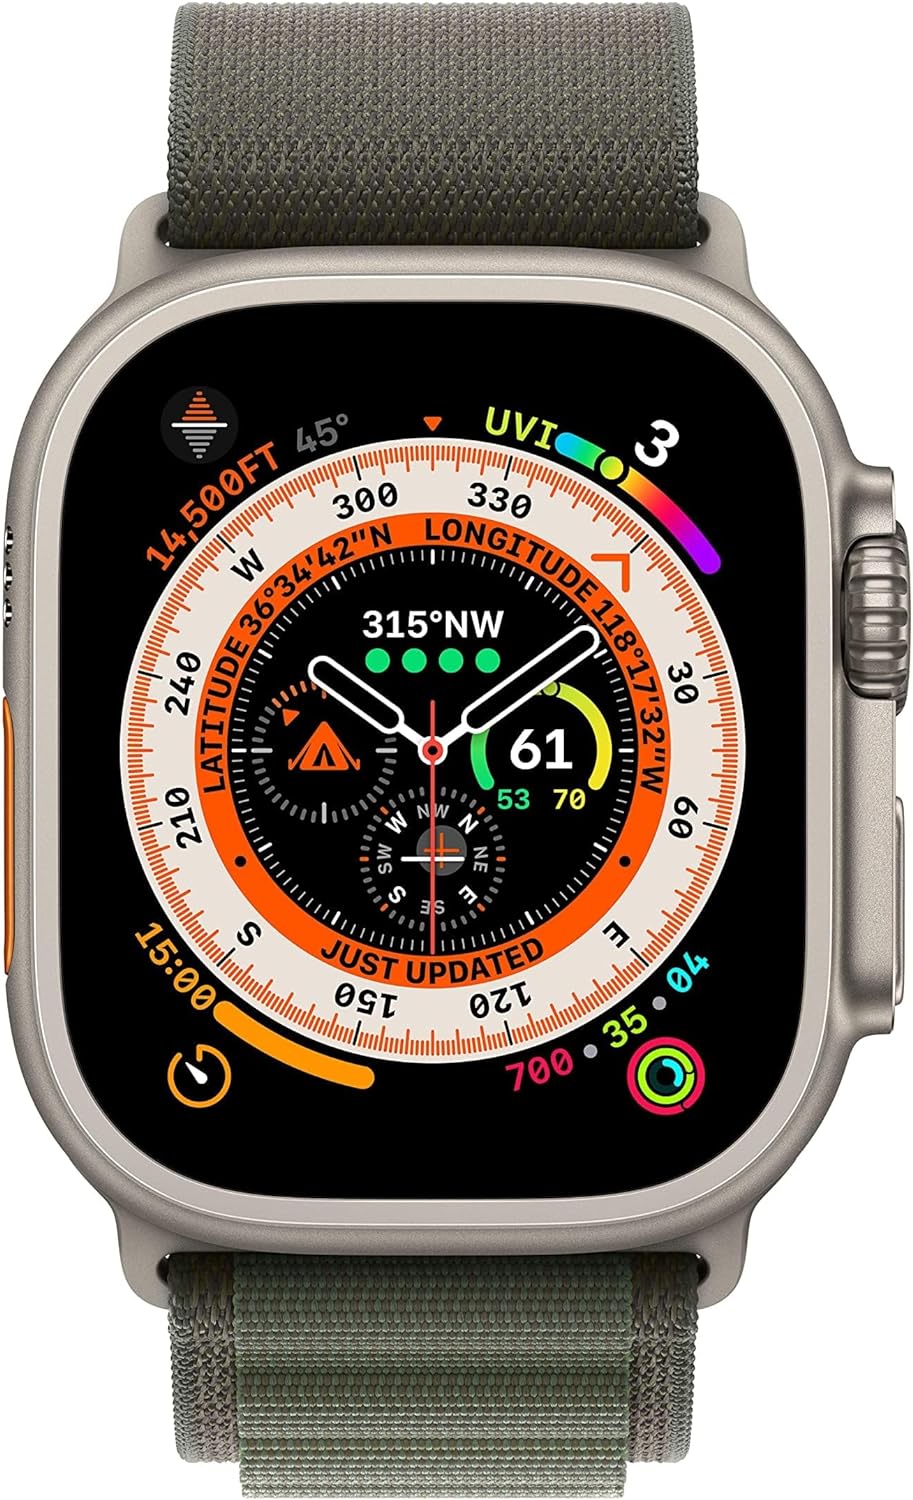 Rugged and capable smartwatch for endurance athletes and outdoor adventurers. 0194253144403